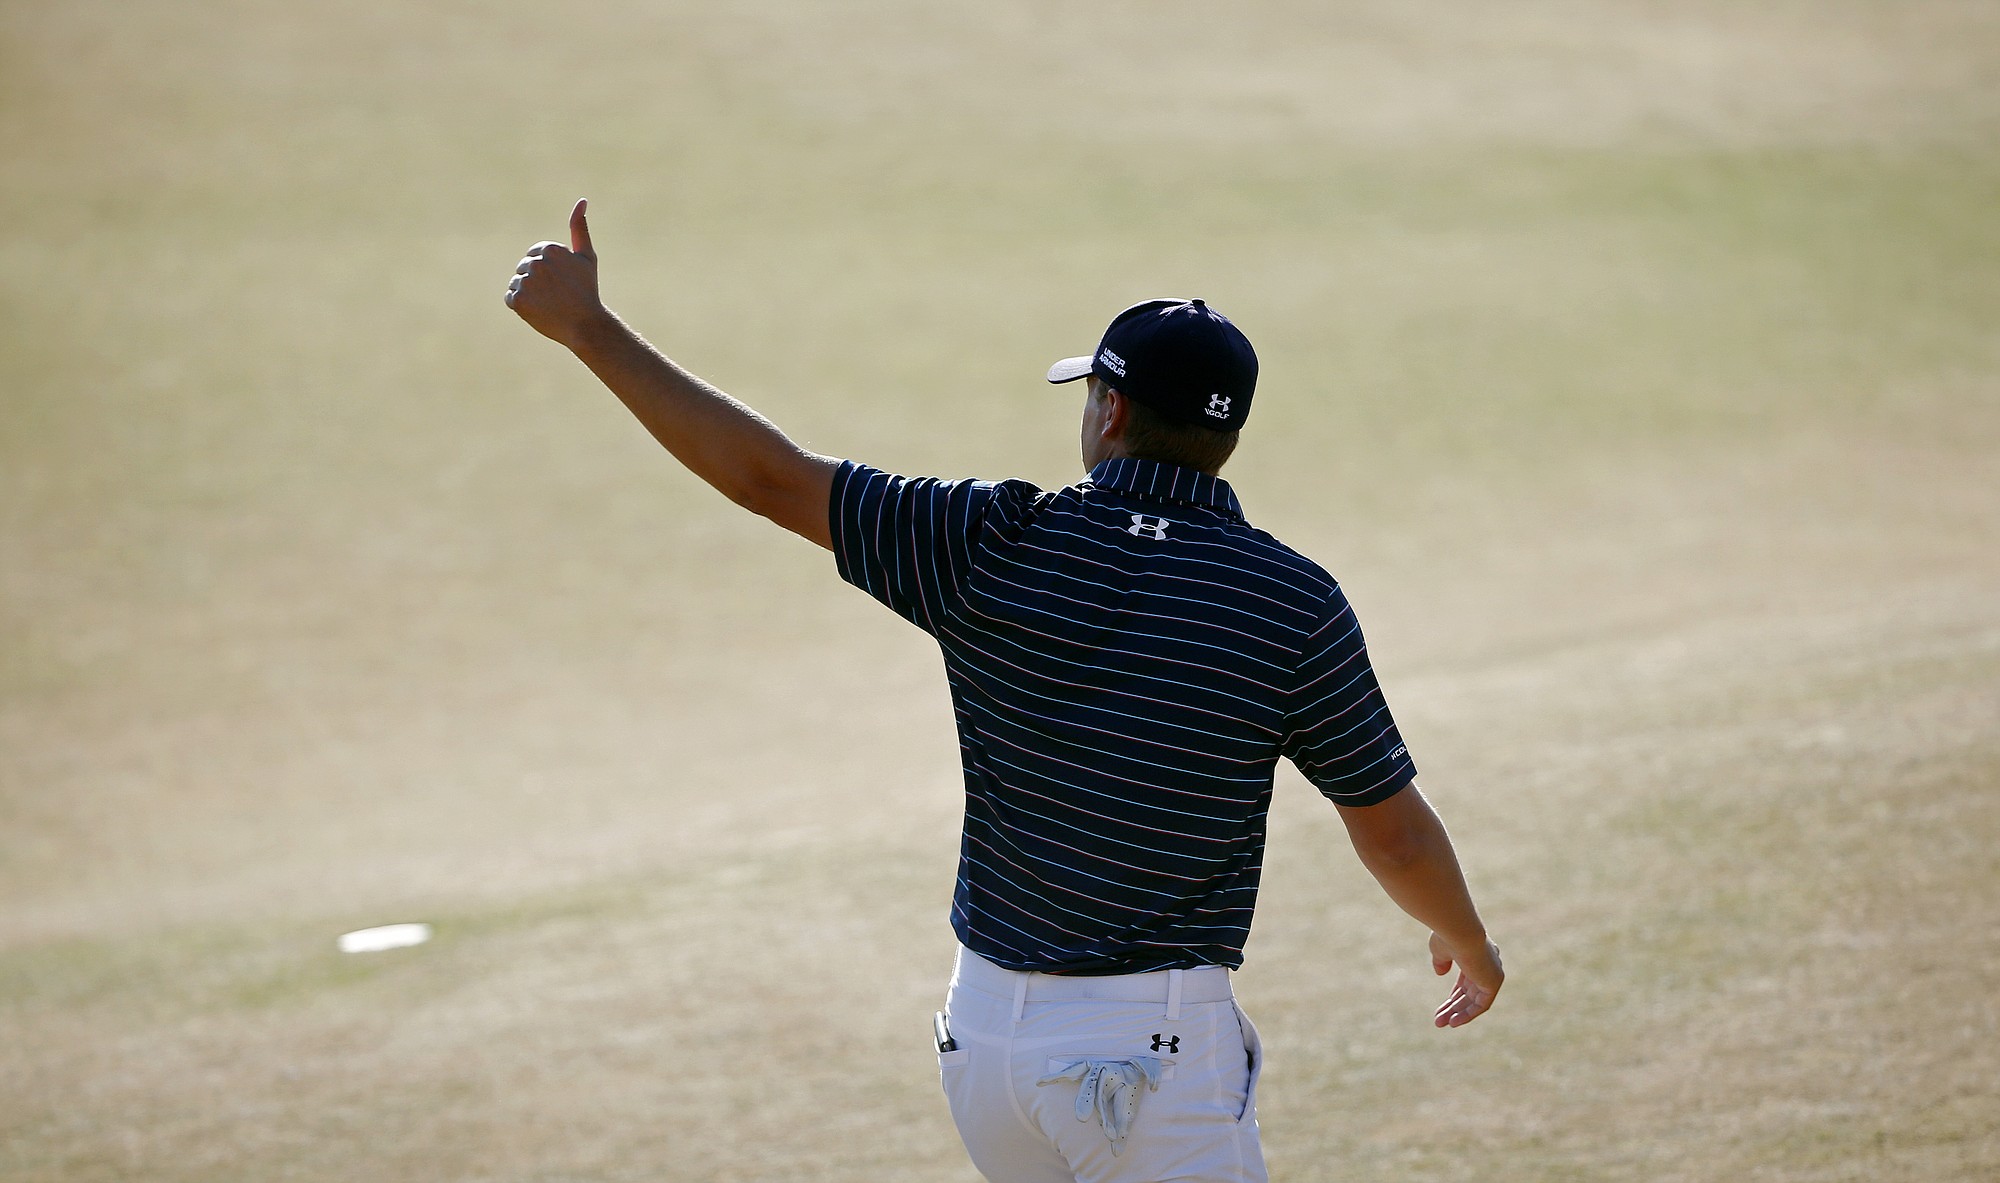 Jordan Spieth walks off the green after the final round of the U.S. Open golf tournament at Chambers Bay on Sunday, June 21, 2015 in University Place, Wash. Spieth won the championship.